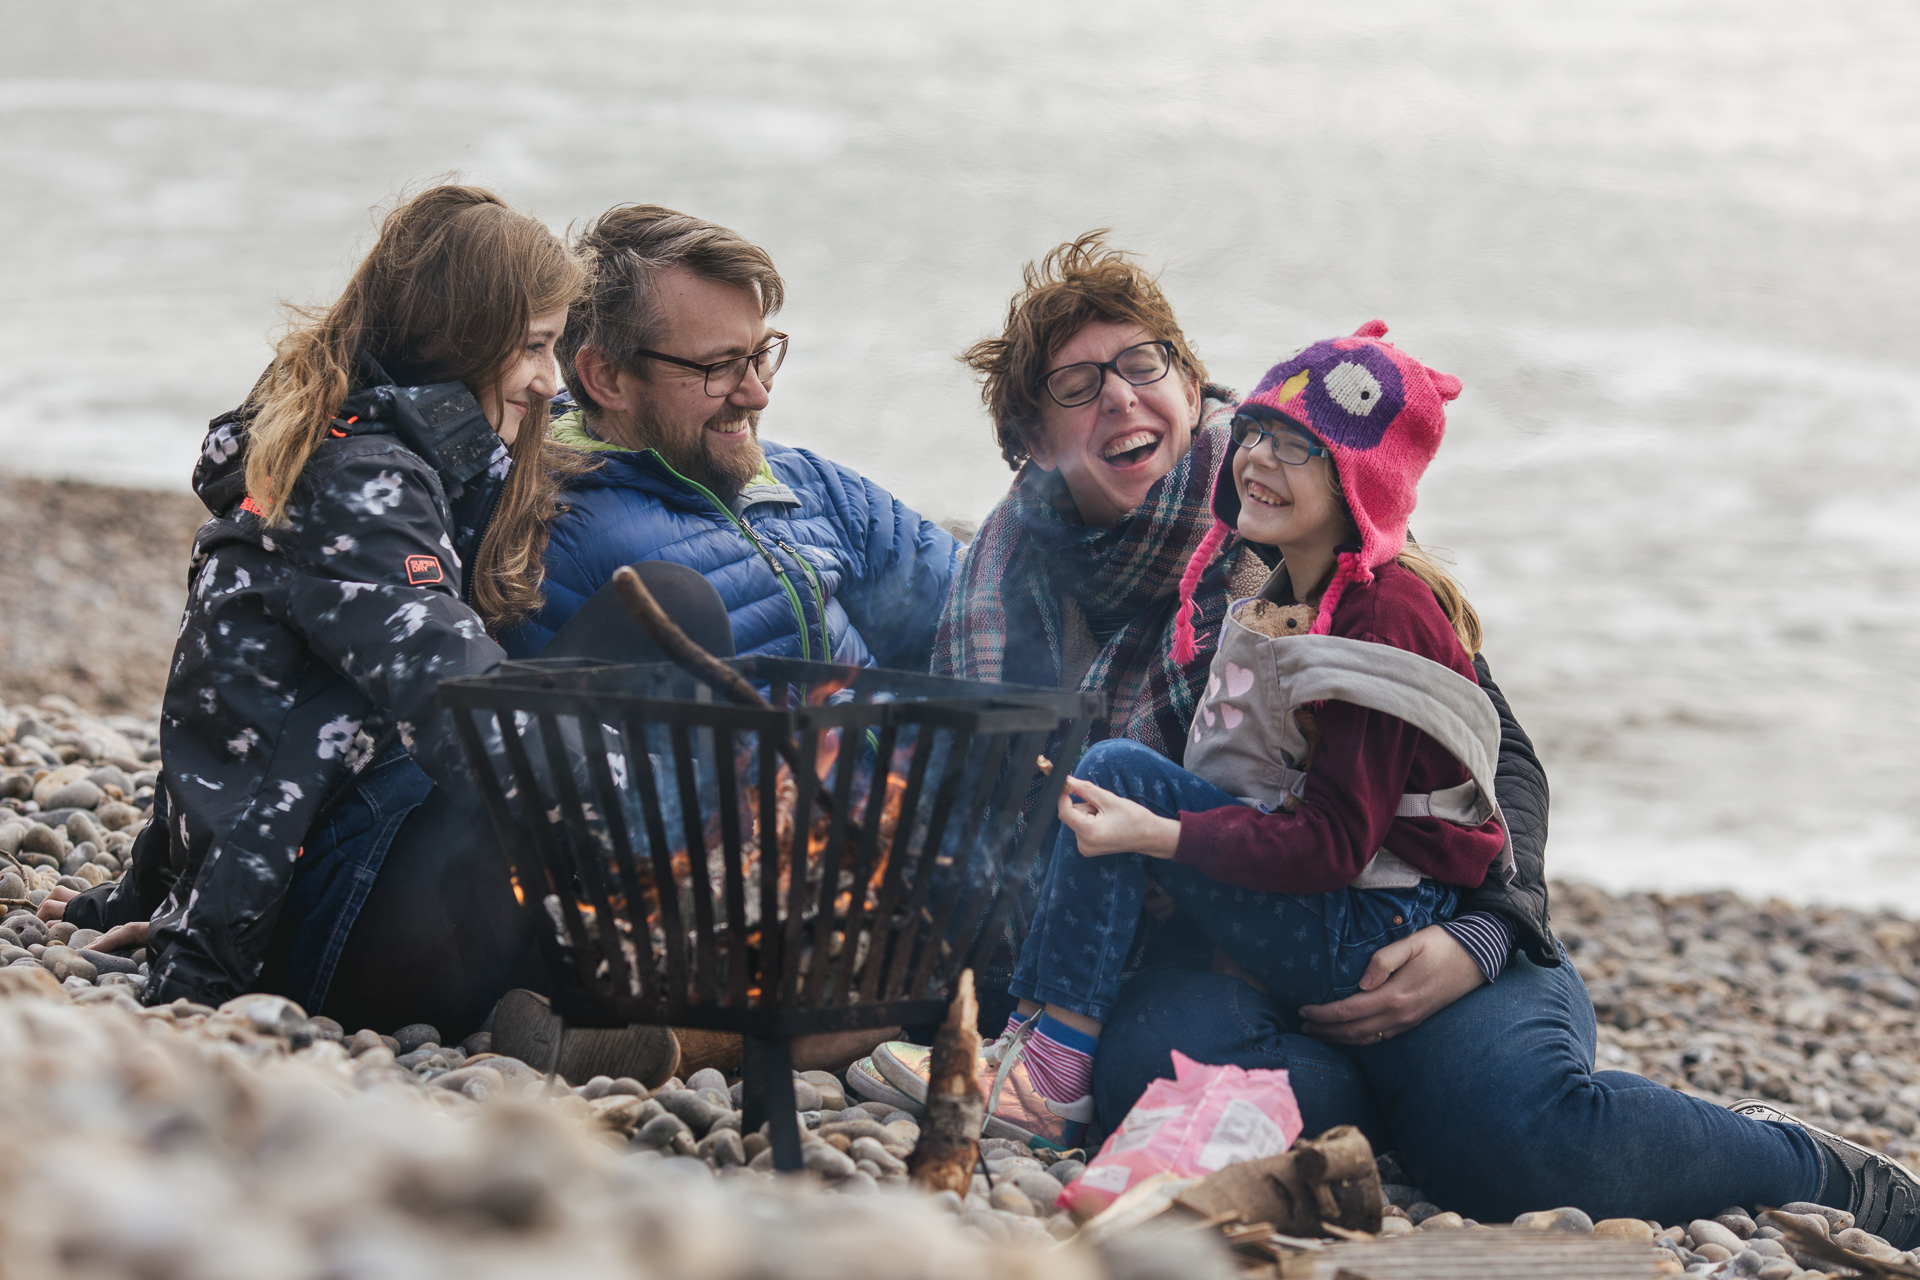 A family laughing together on a beach